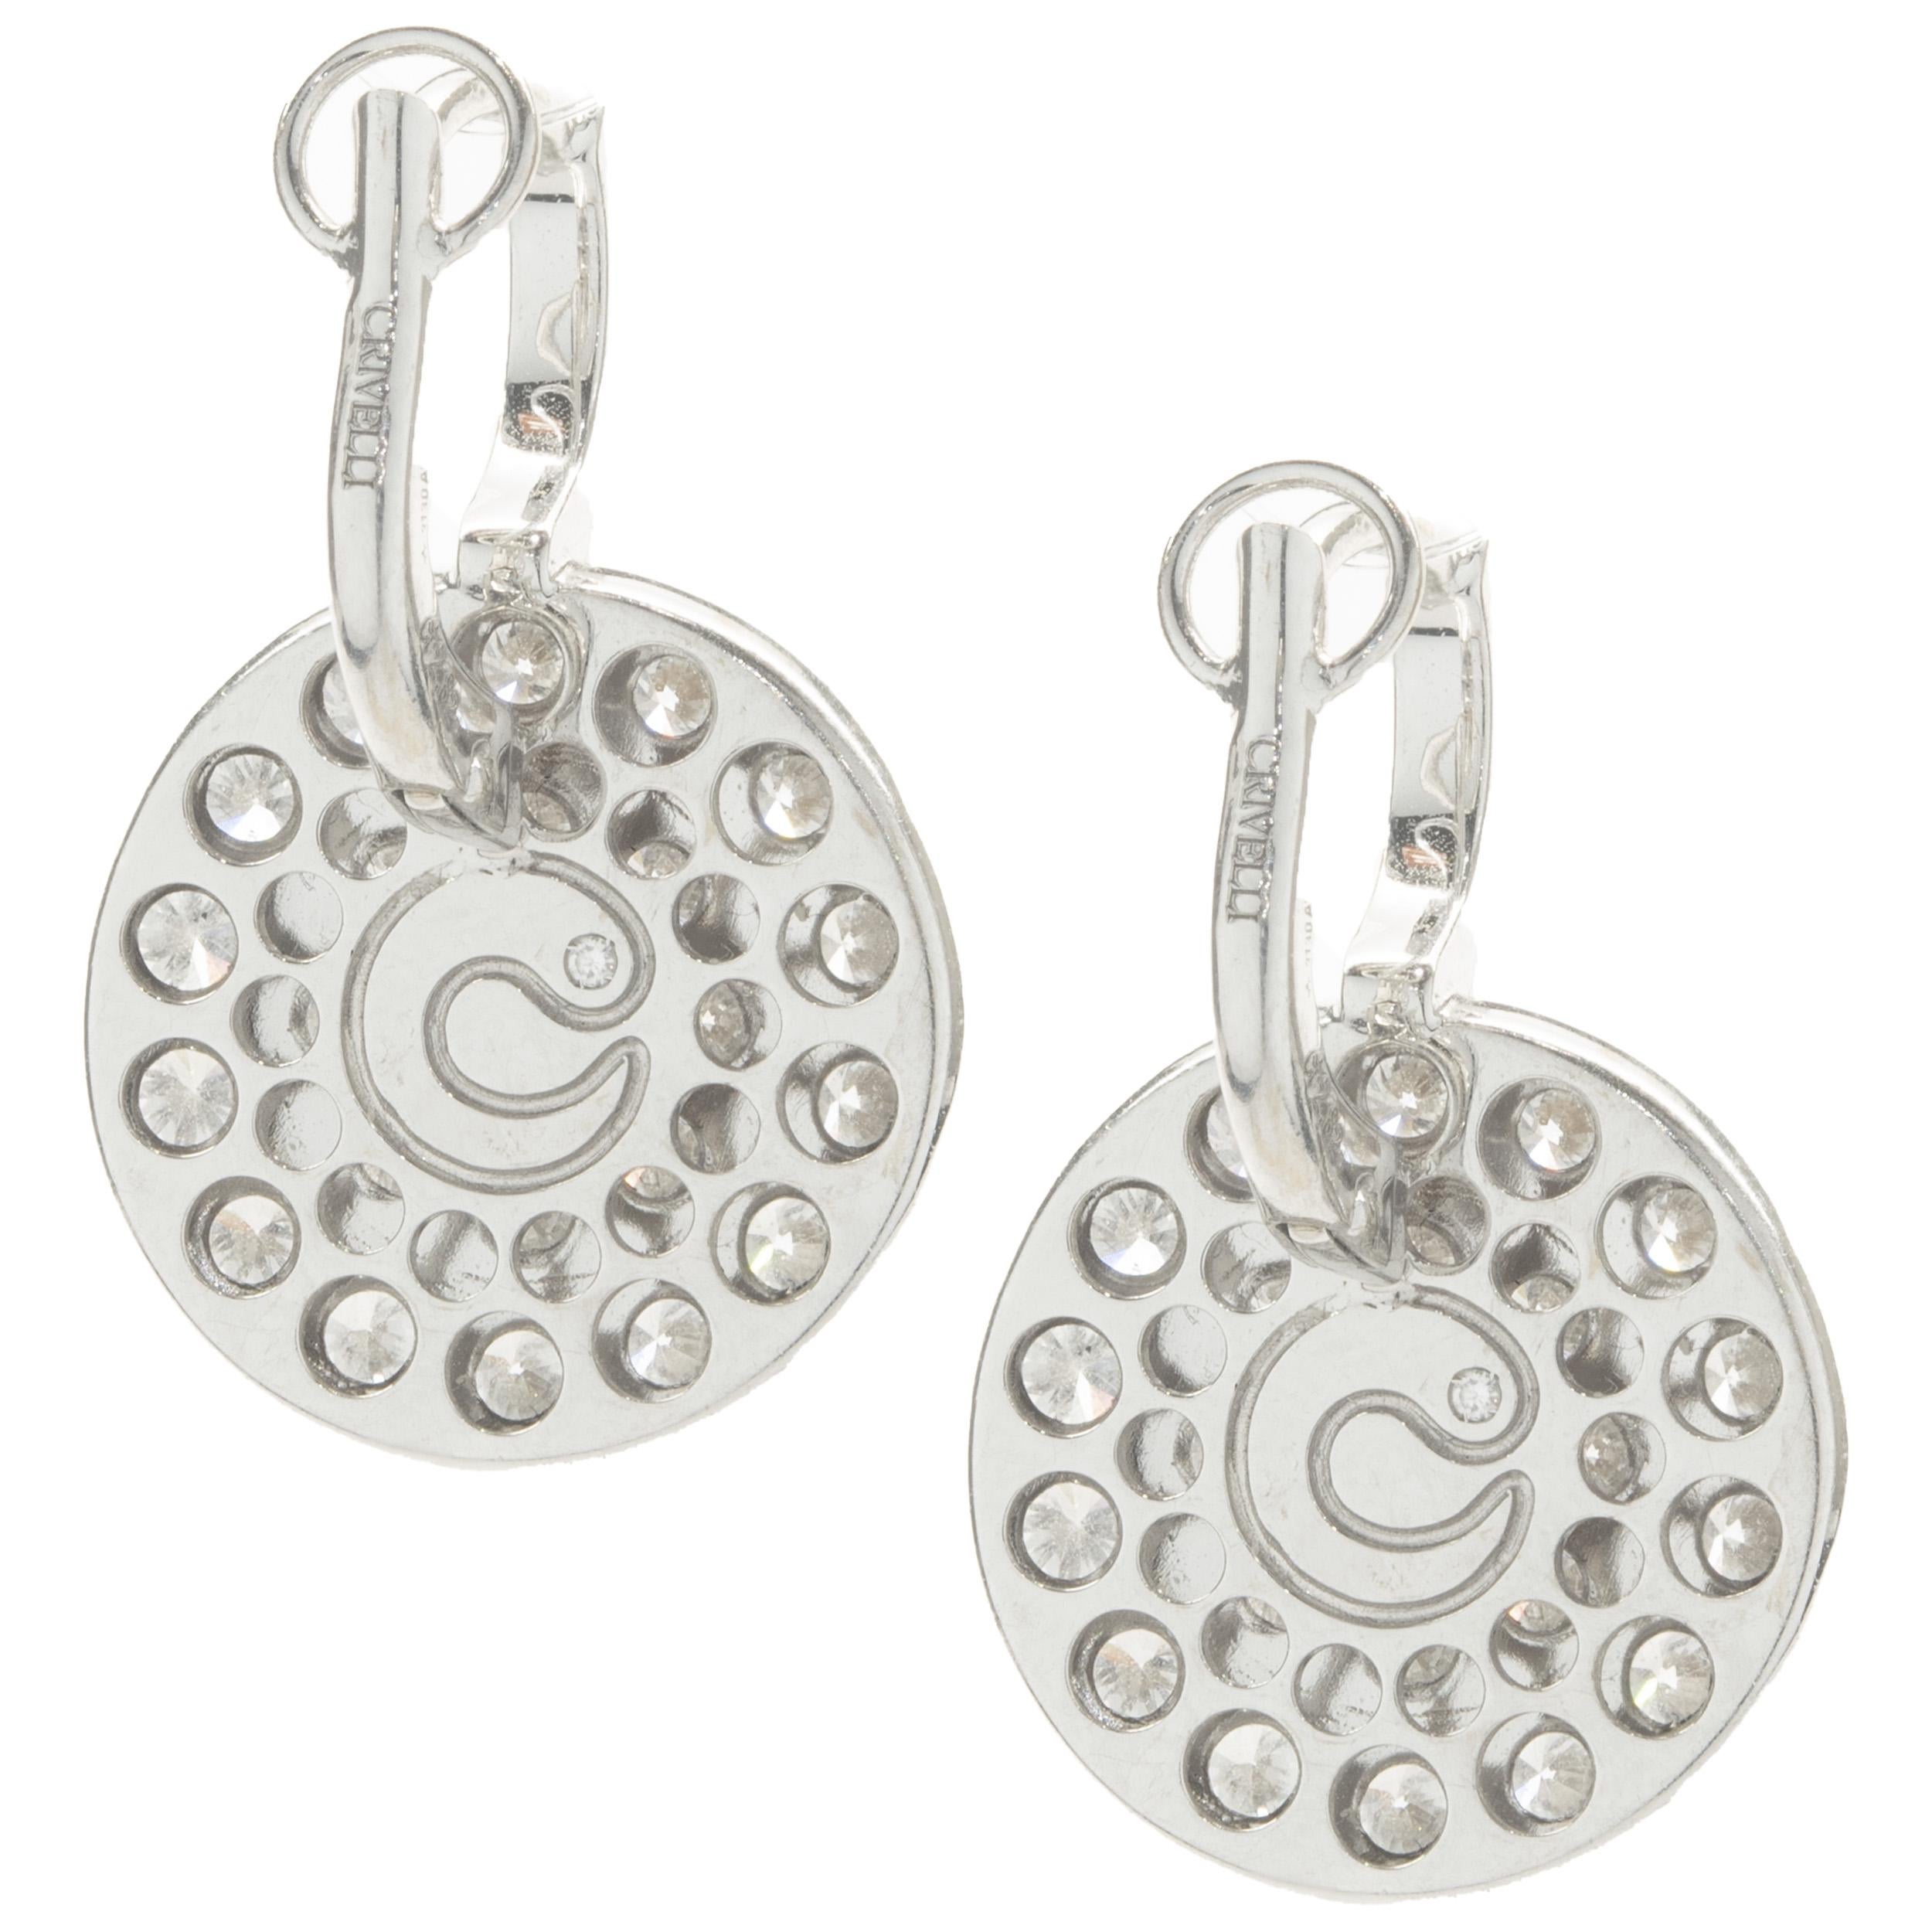 Designer: Crivelli
Material: 18K white gold
Diamond: 58 round brilliant cut = 3.38cttw
Color: G
Clarity: VS2
Weight: 5.36 grams
Dimensions: earrings measure 23.5 X 15.25mm